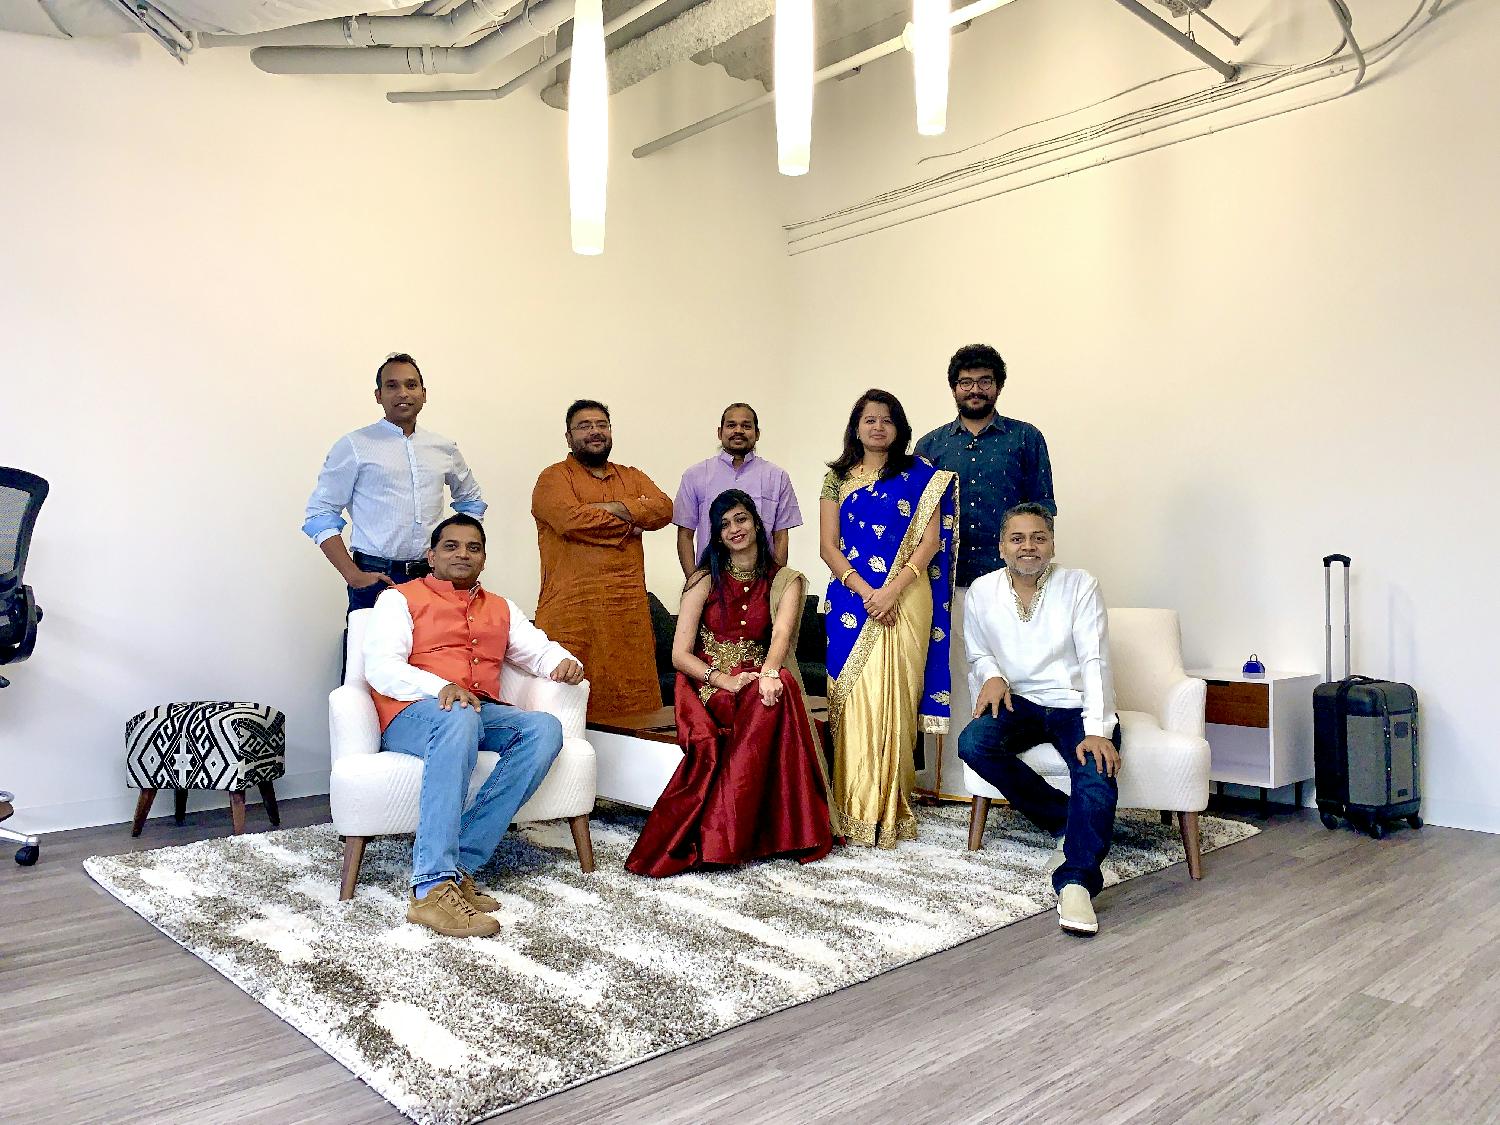 Diwali is an important holiday in the Indian culture. In 2019 Cowbell had a celebration for everyone who wanted to join.